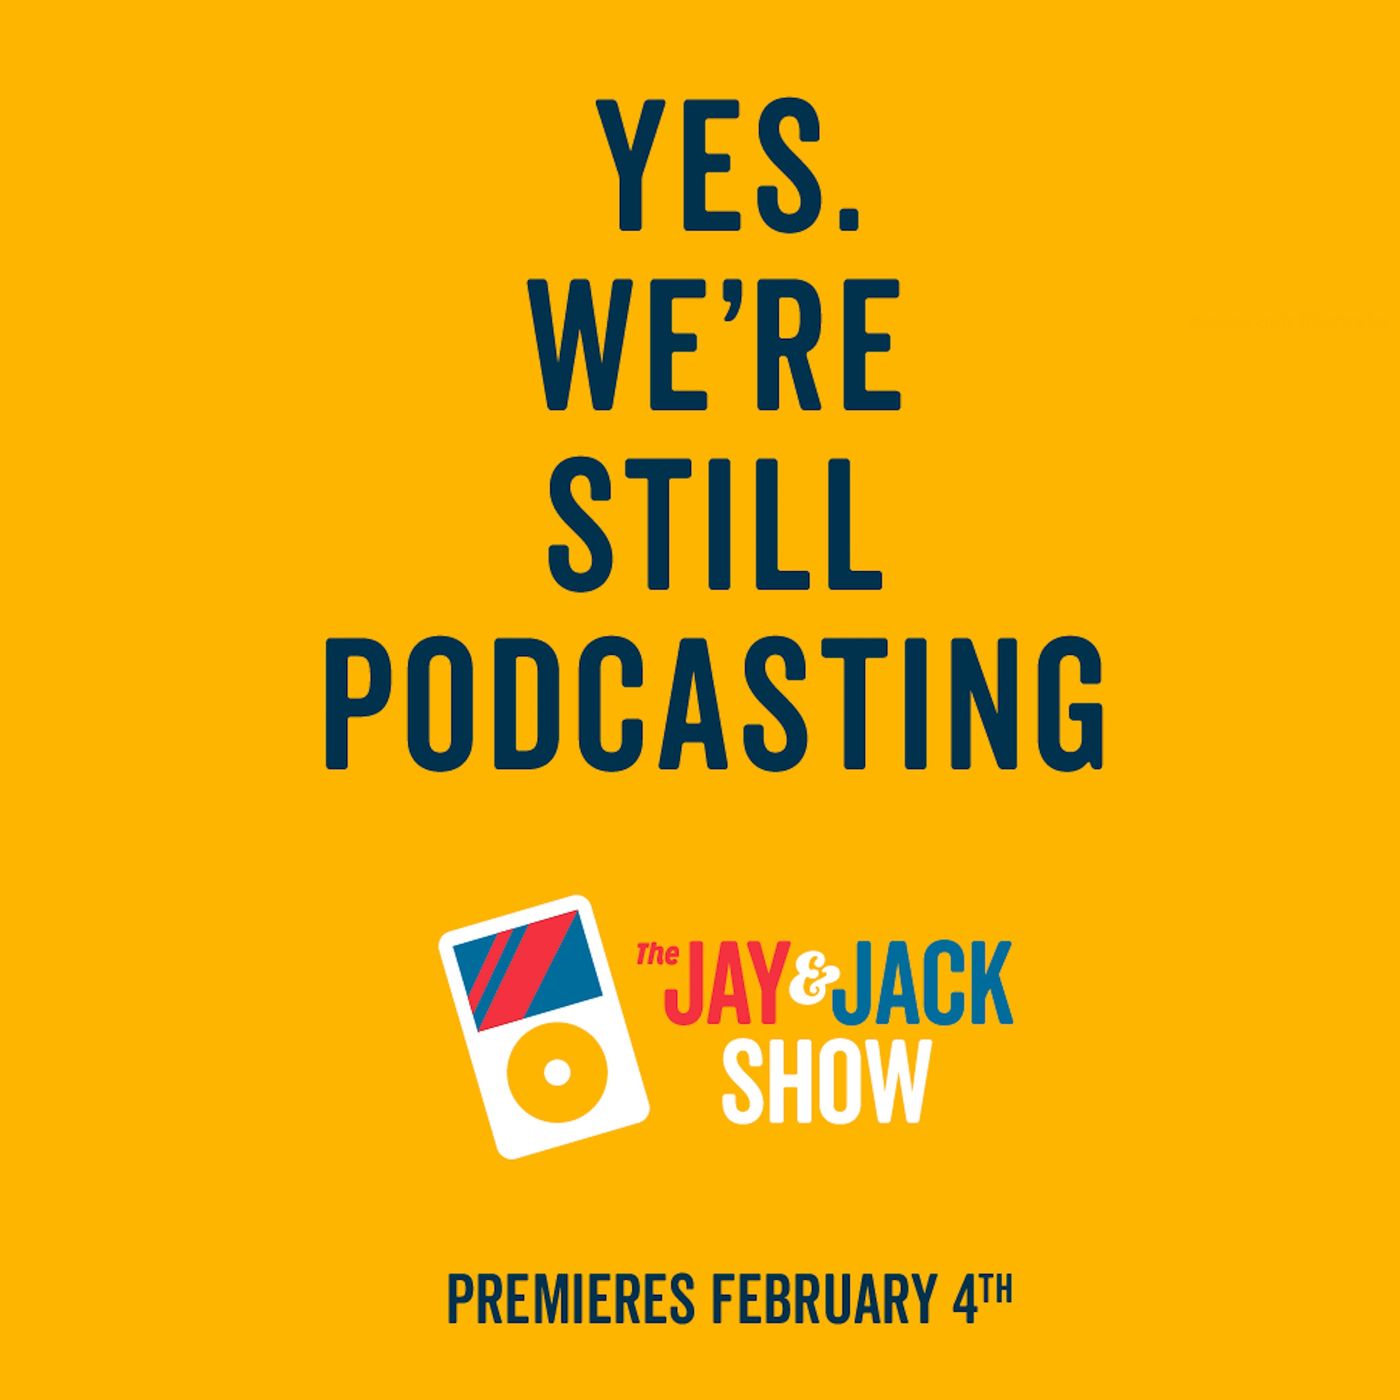 Coming Soon: The Jay and Jack Show